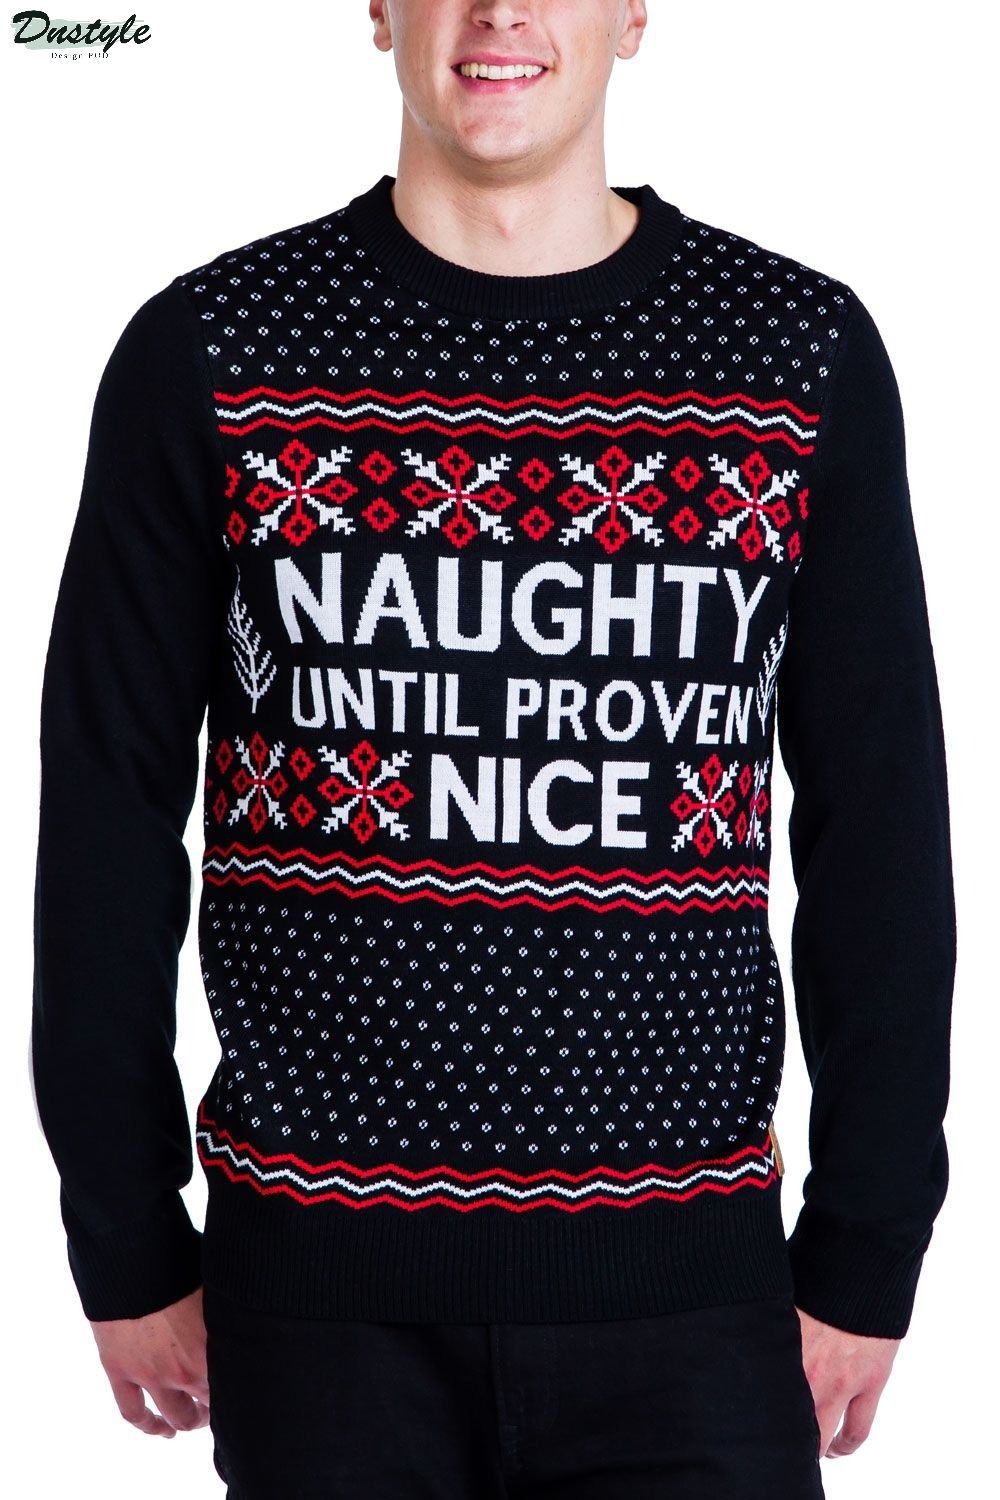 Naughty until proven nice ugly christmas sweater